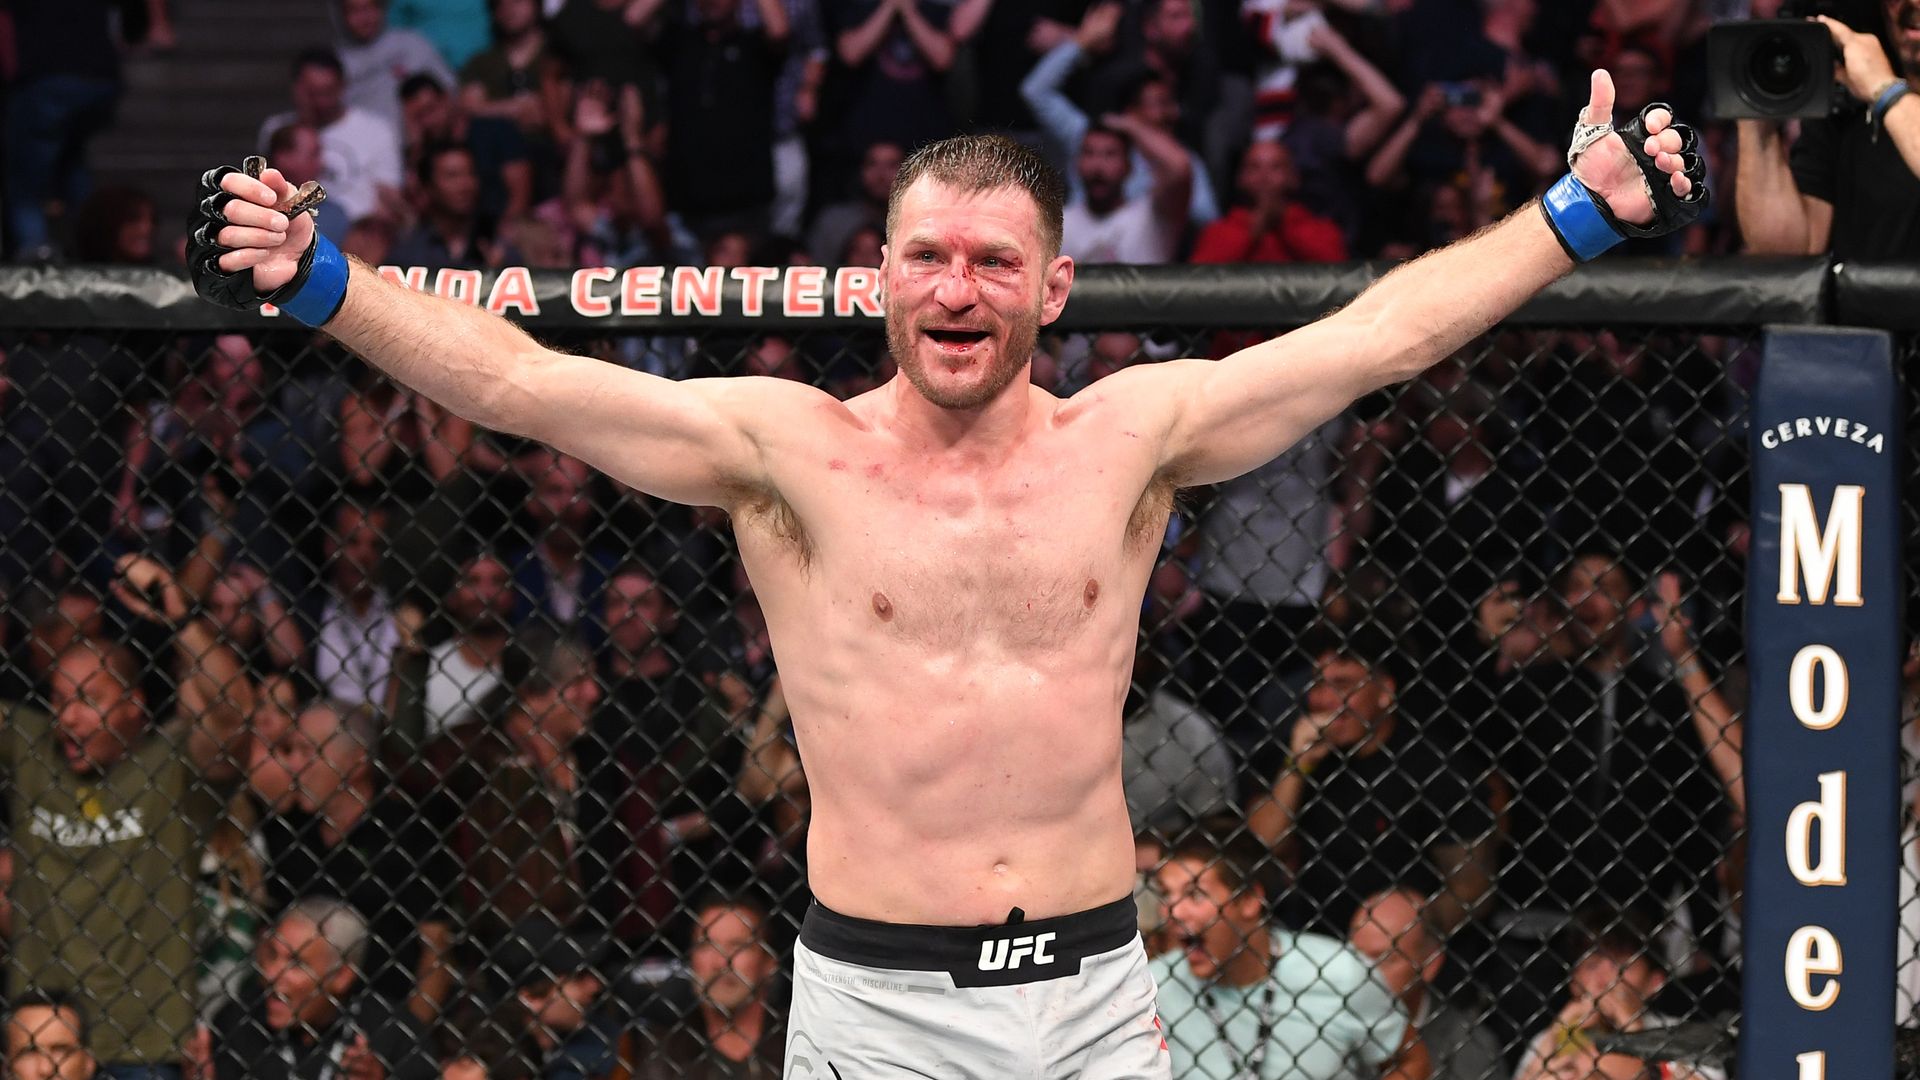 Stipe Miocic raises his arms after a fight. 